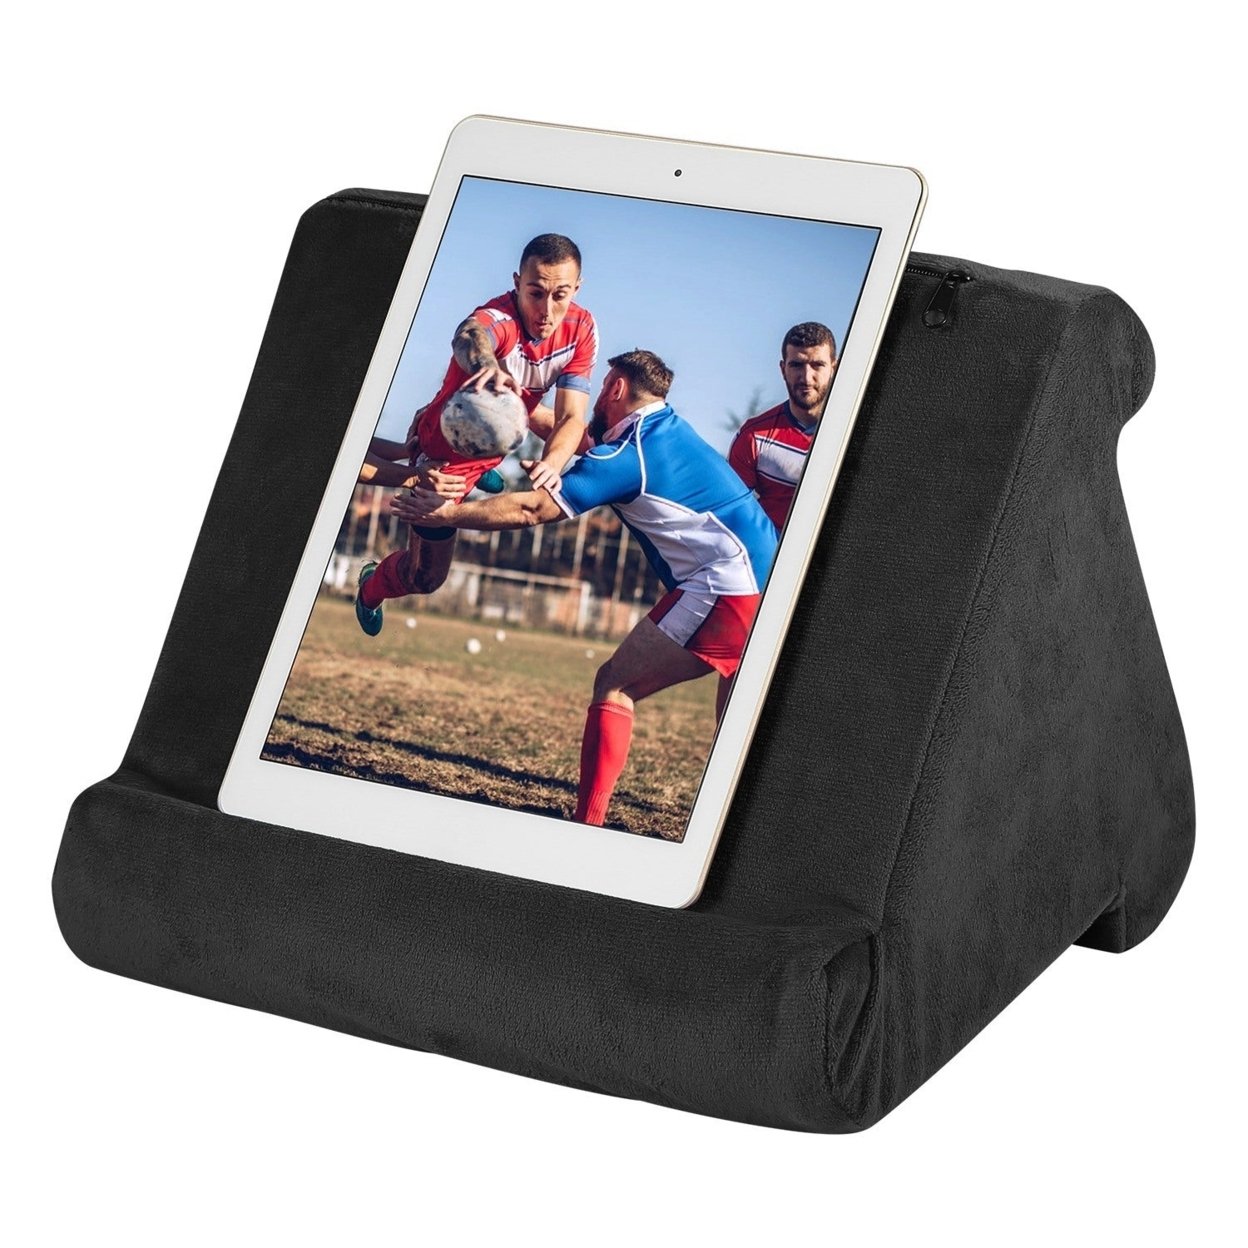 Dsermall Multi-Angles Soft Tablet Stand Tablet Pillow for iPad Smartphones E-Readers Books Magazines